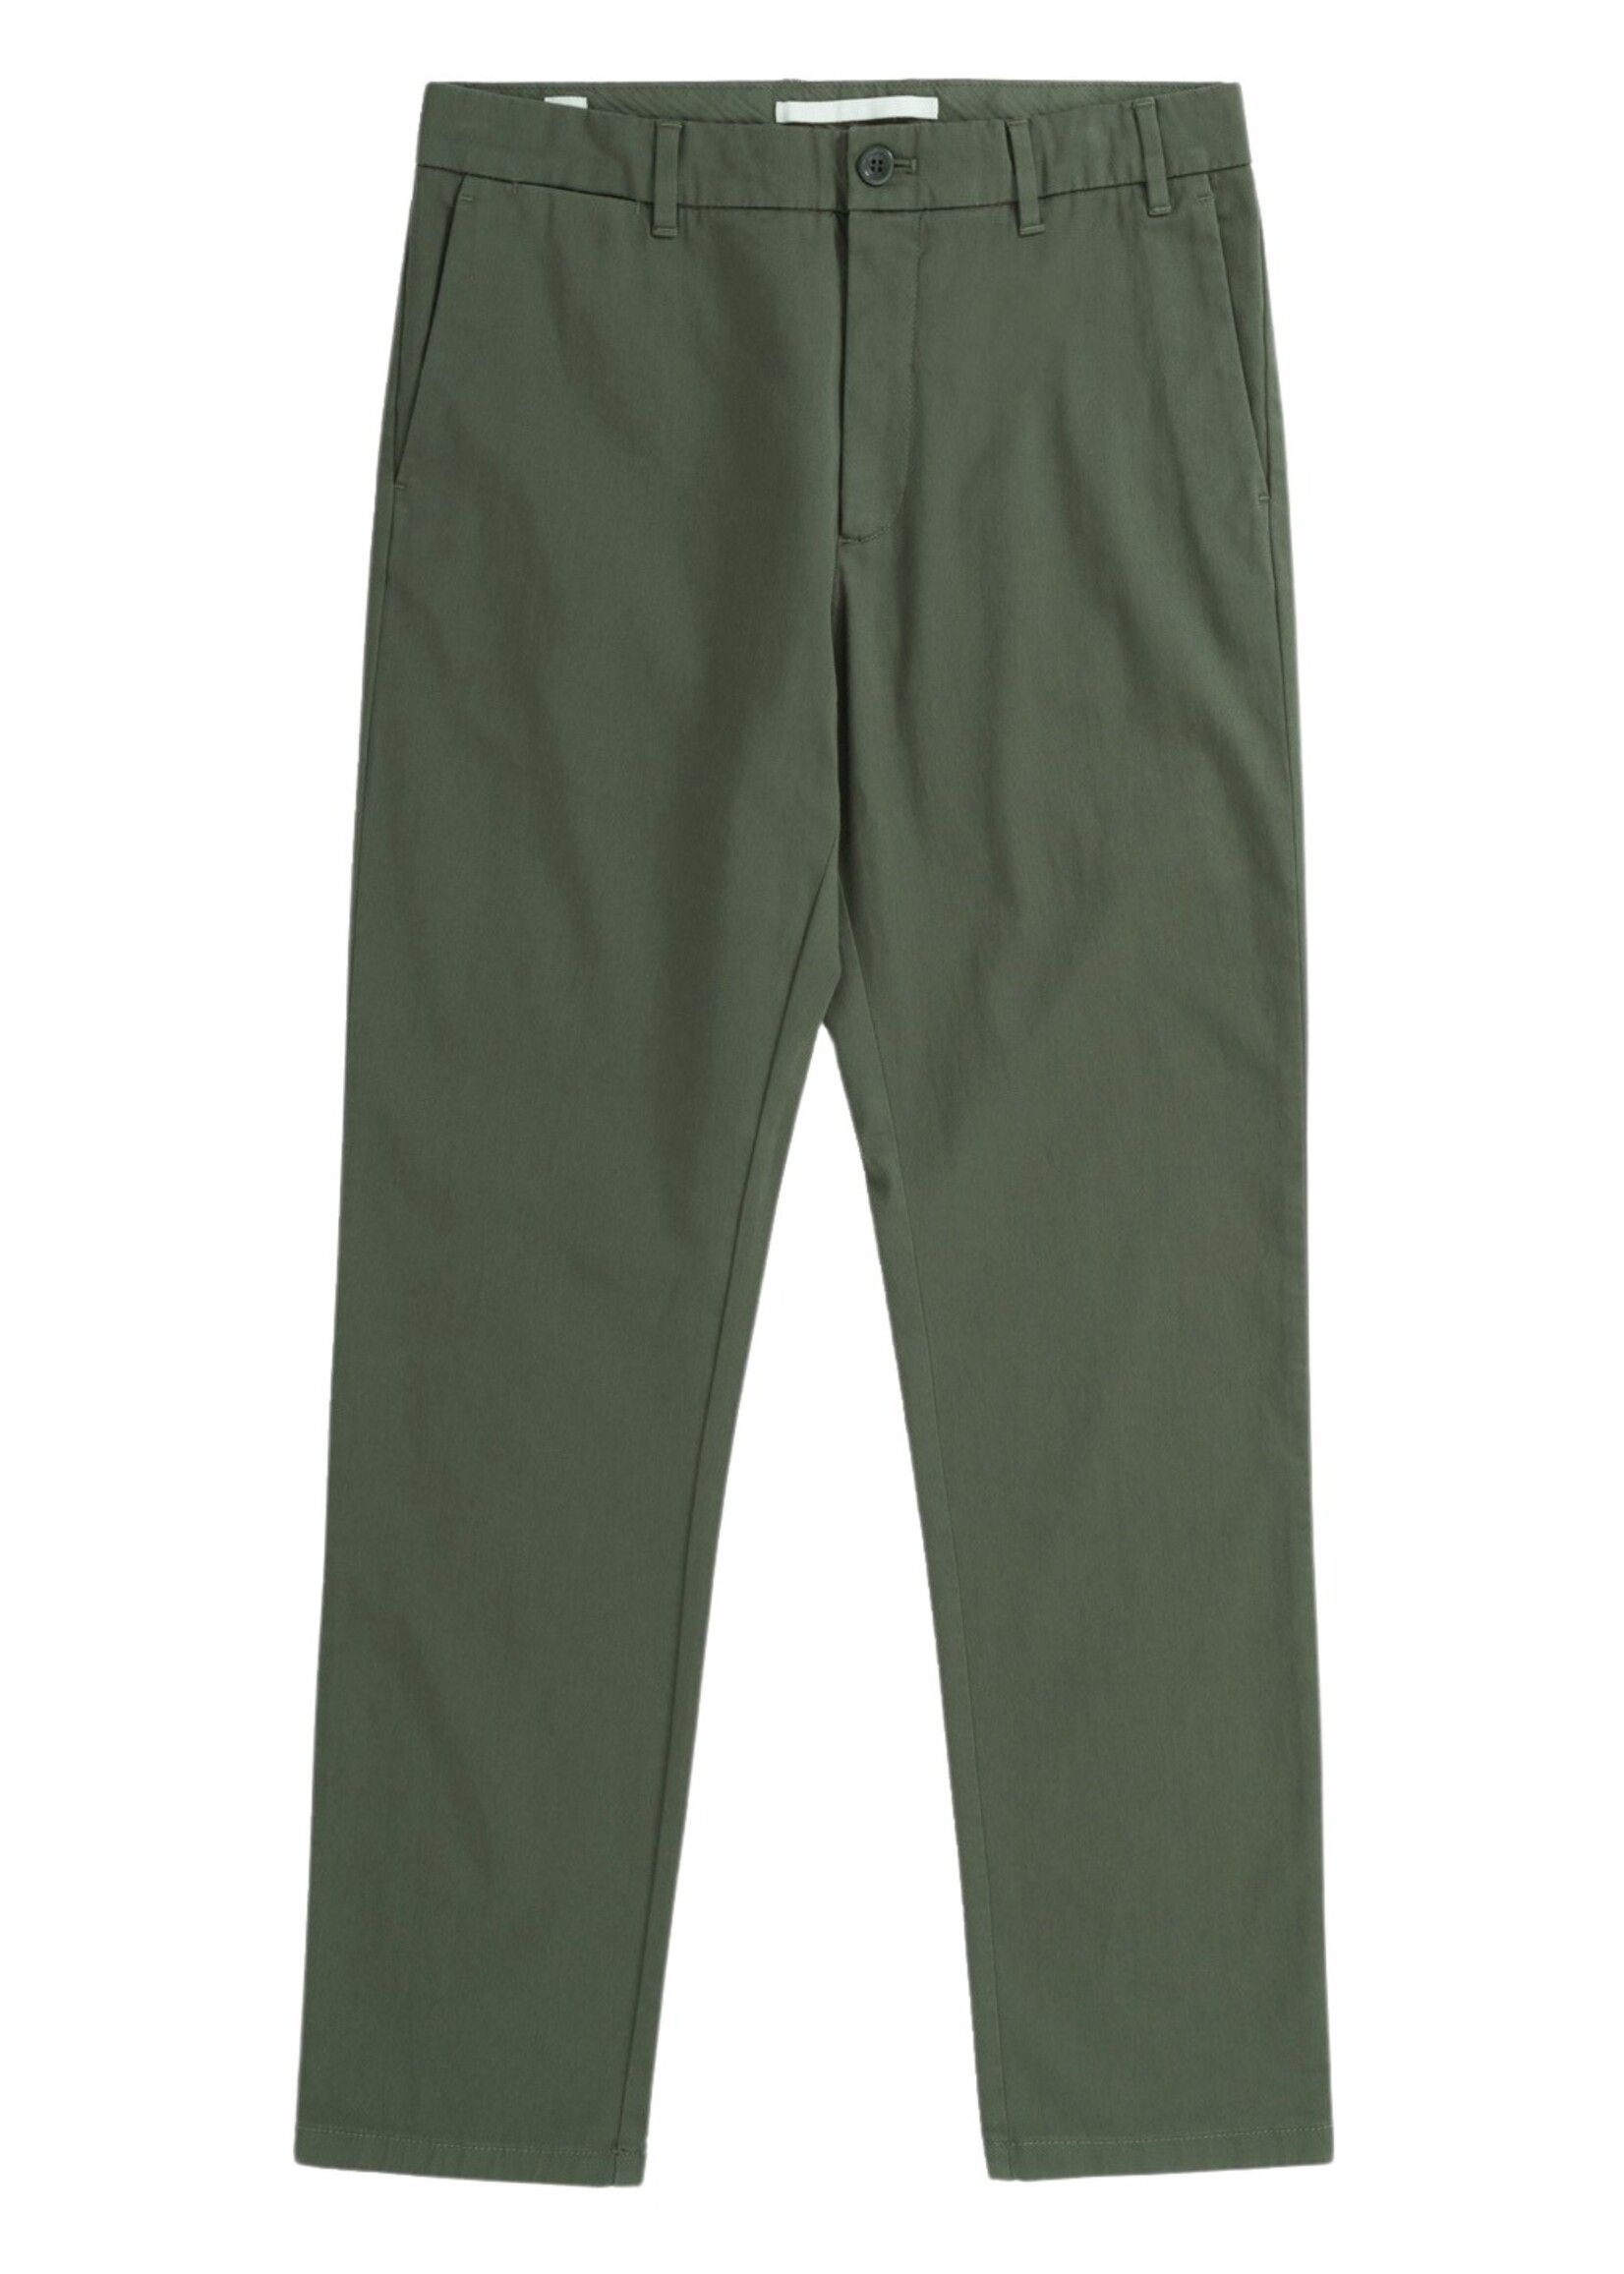 NORSE PROJECTS AROS SLIM STRETCH TWILL CHINO